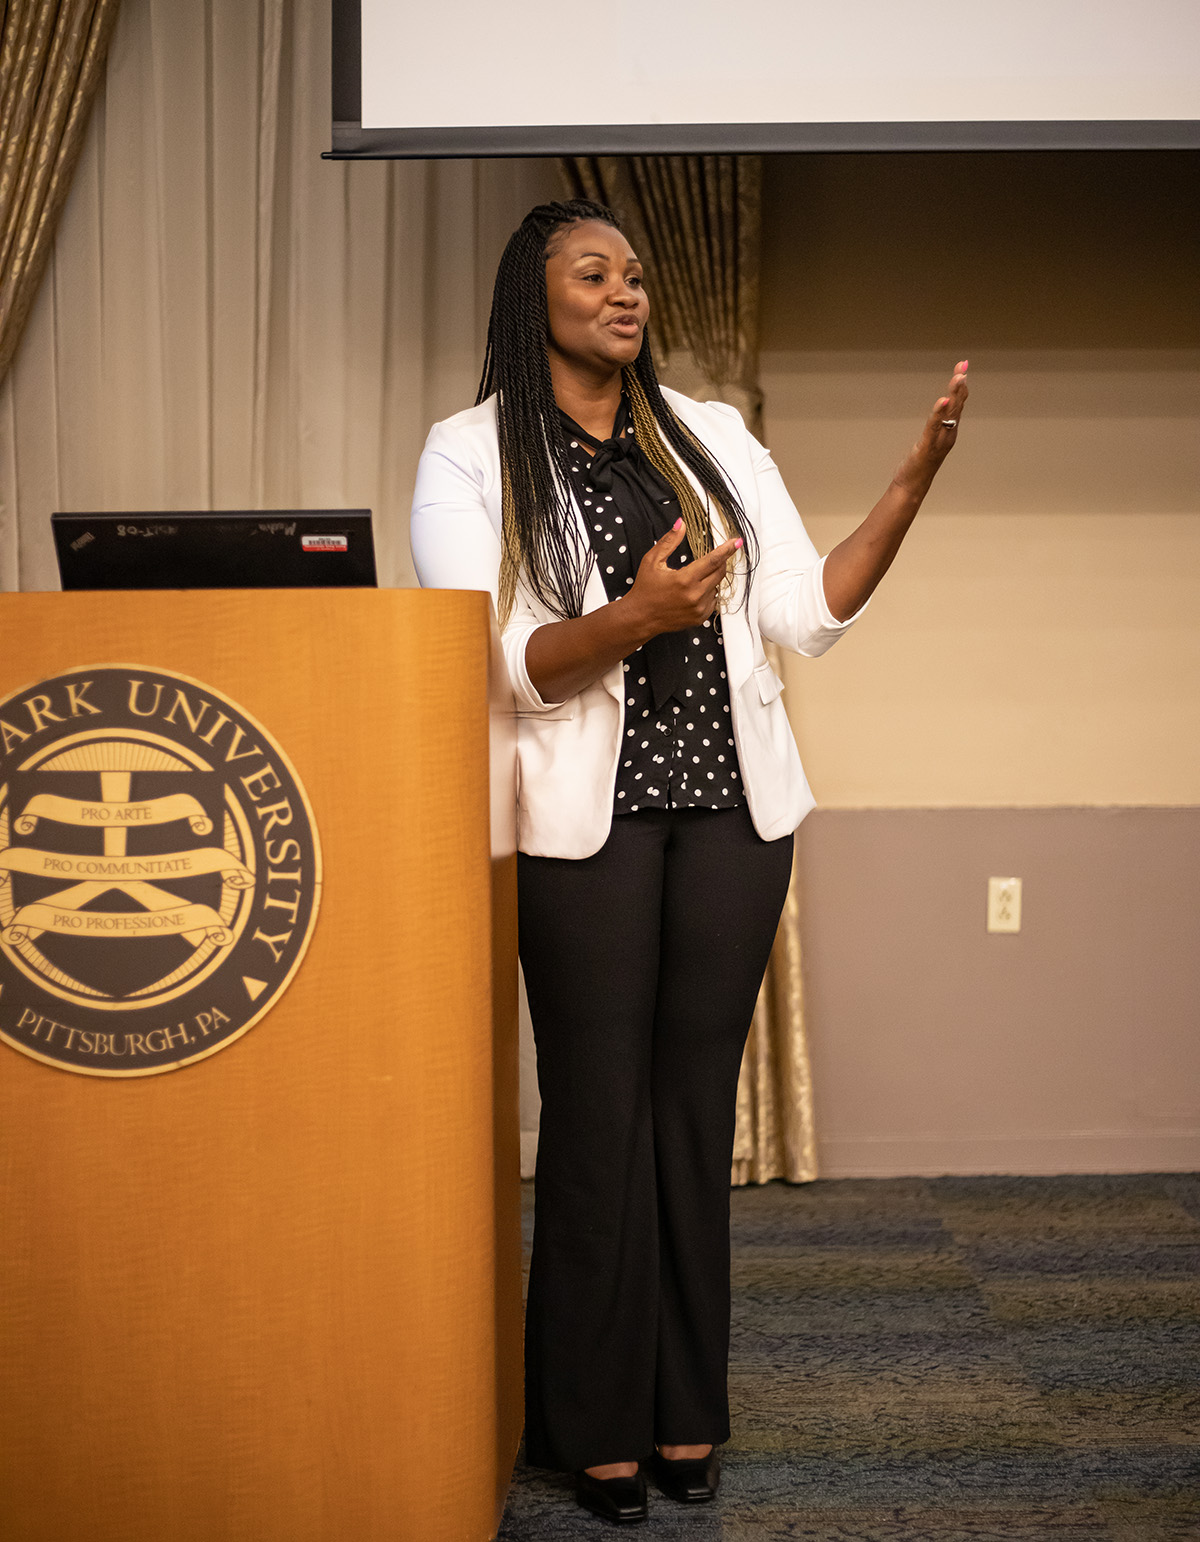 Pictured is the 2019 Criminal Justice Administration Graduate Symposium. Photo by Hannah Johnston